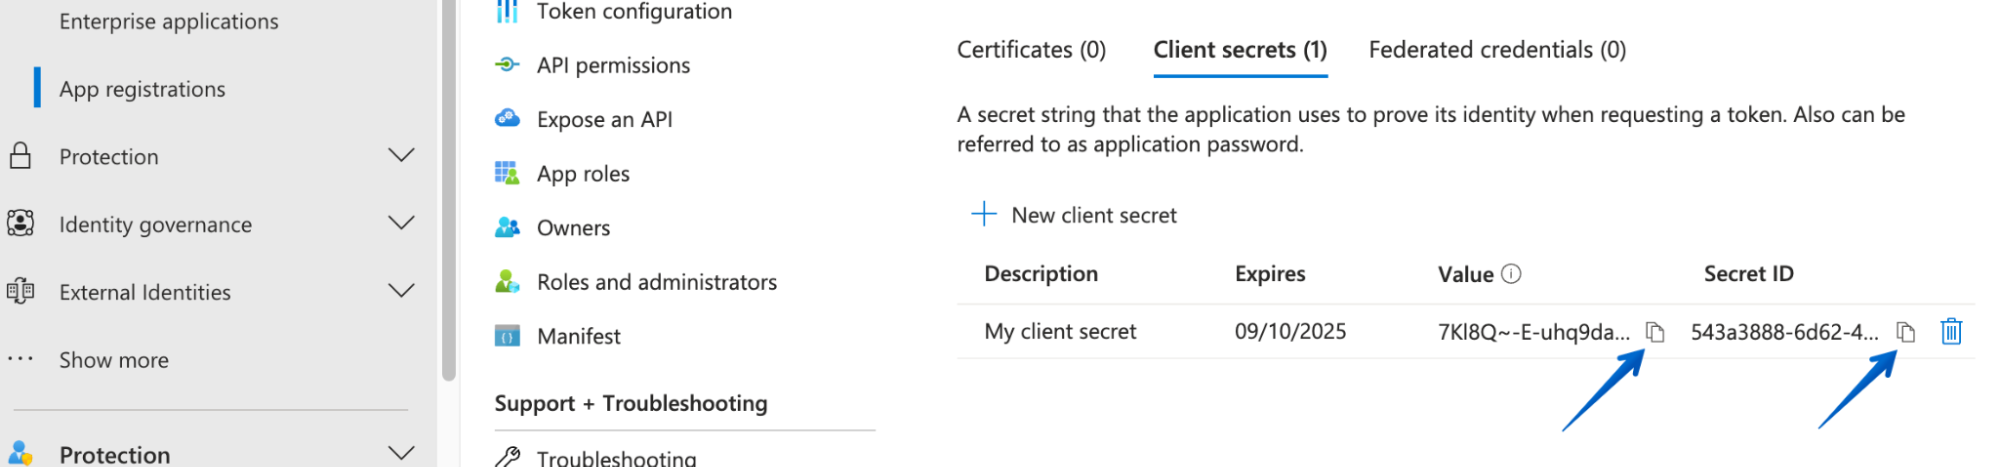 Copying the secret value and secret ID to the clipboard